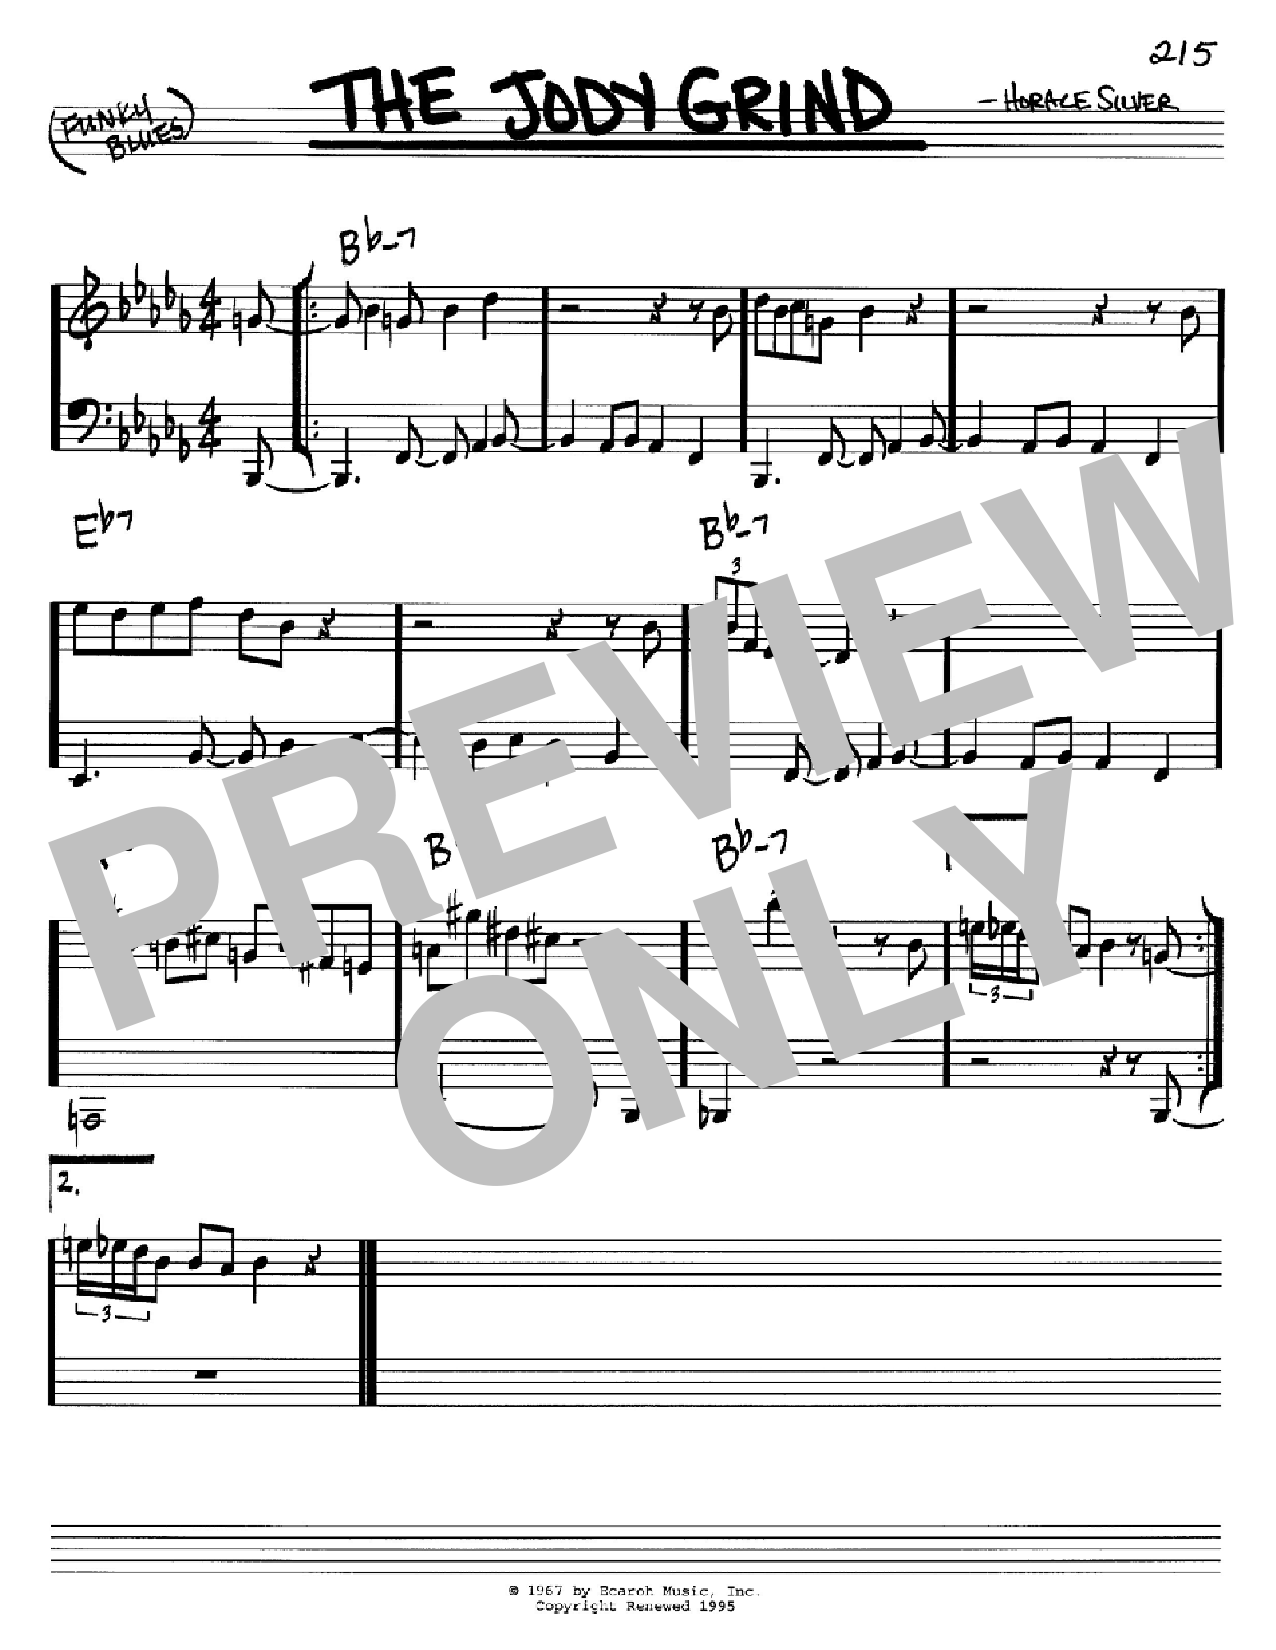 Download Horace Silver The Jody Grind Sheet Music